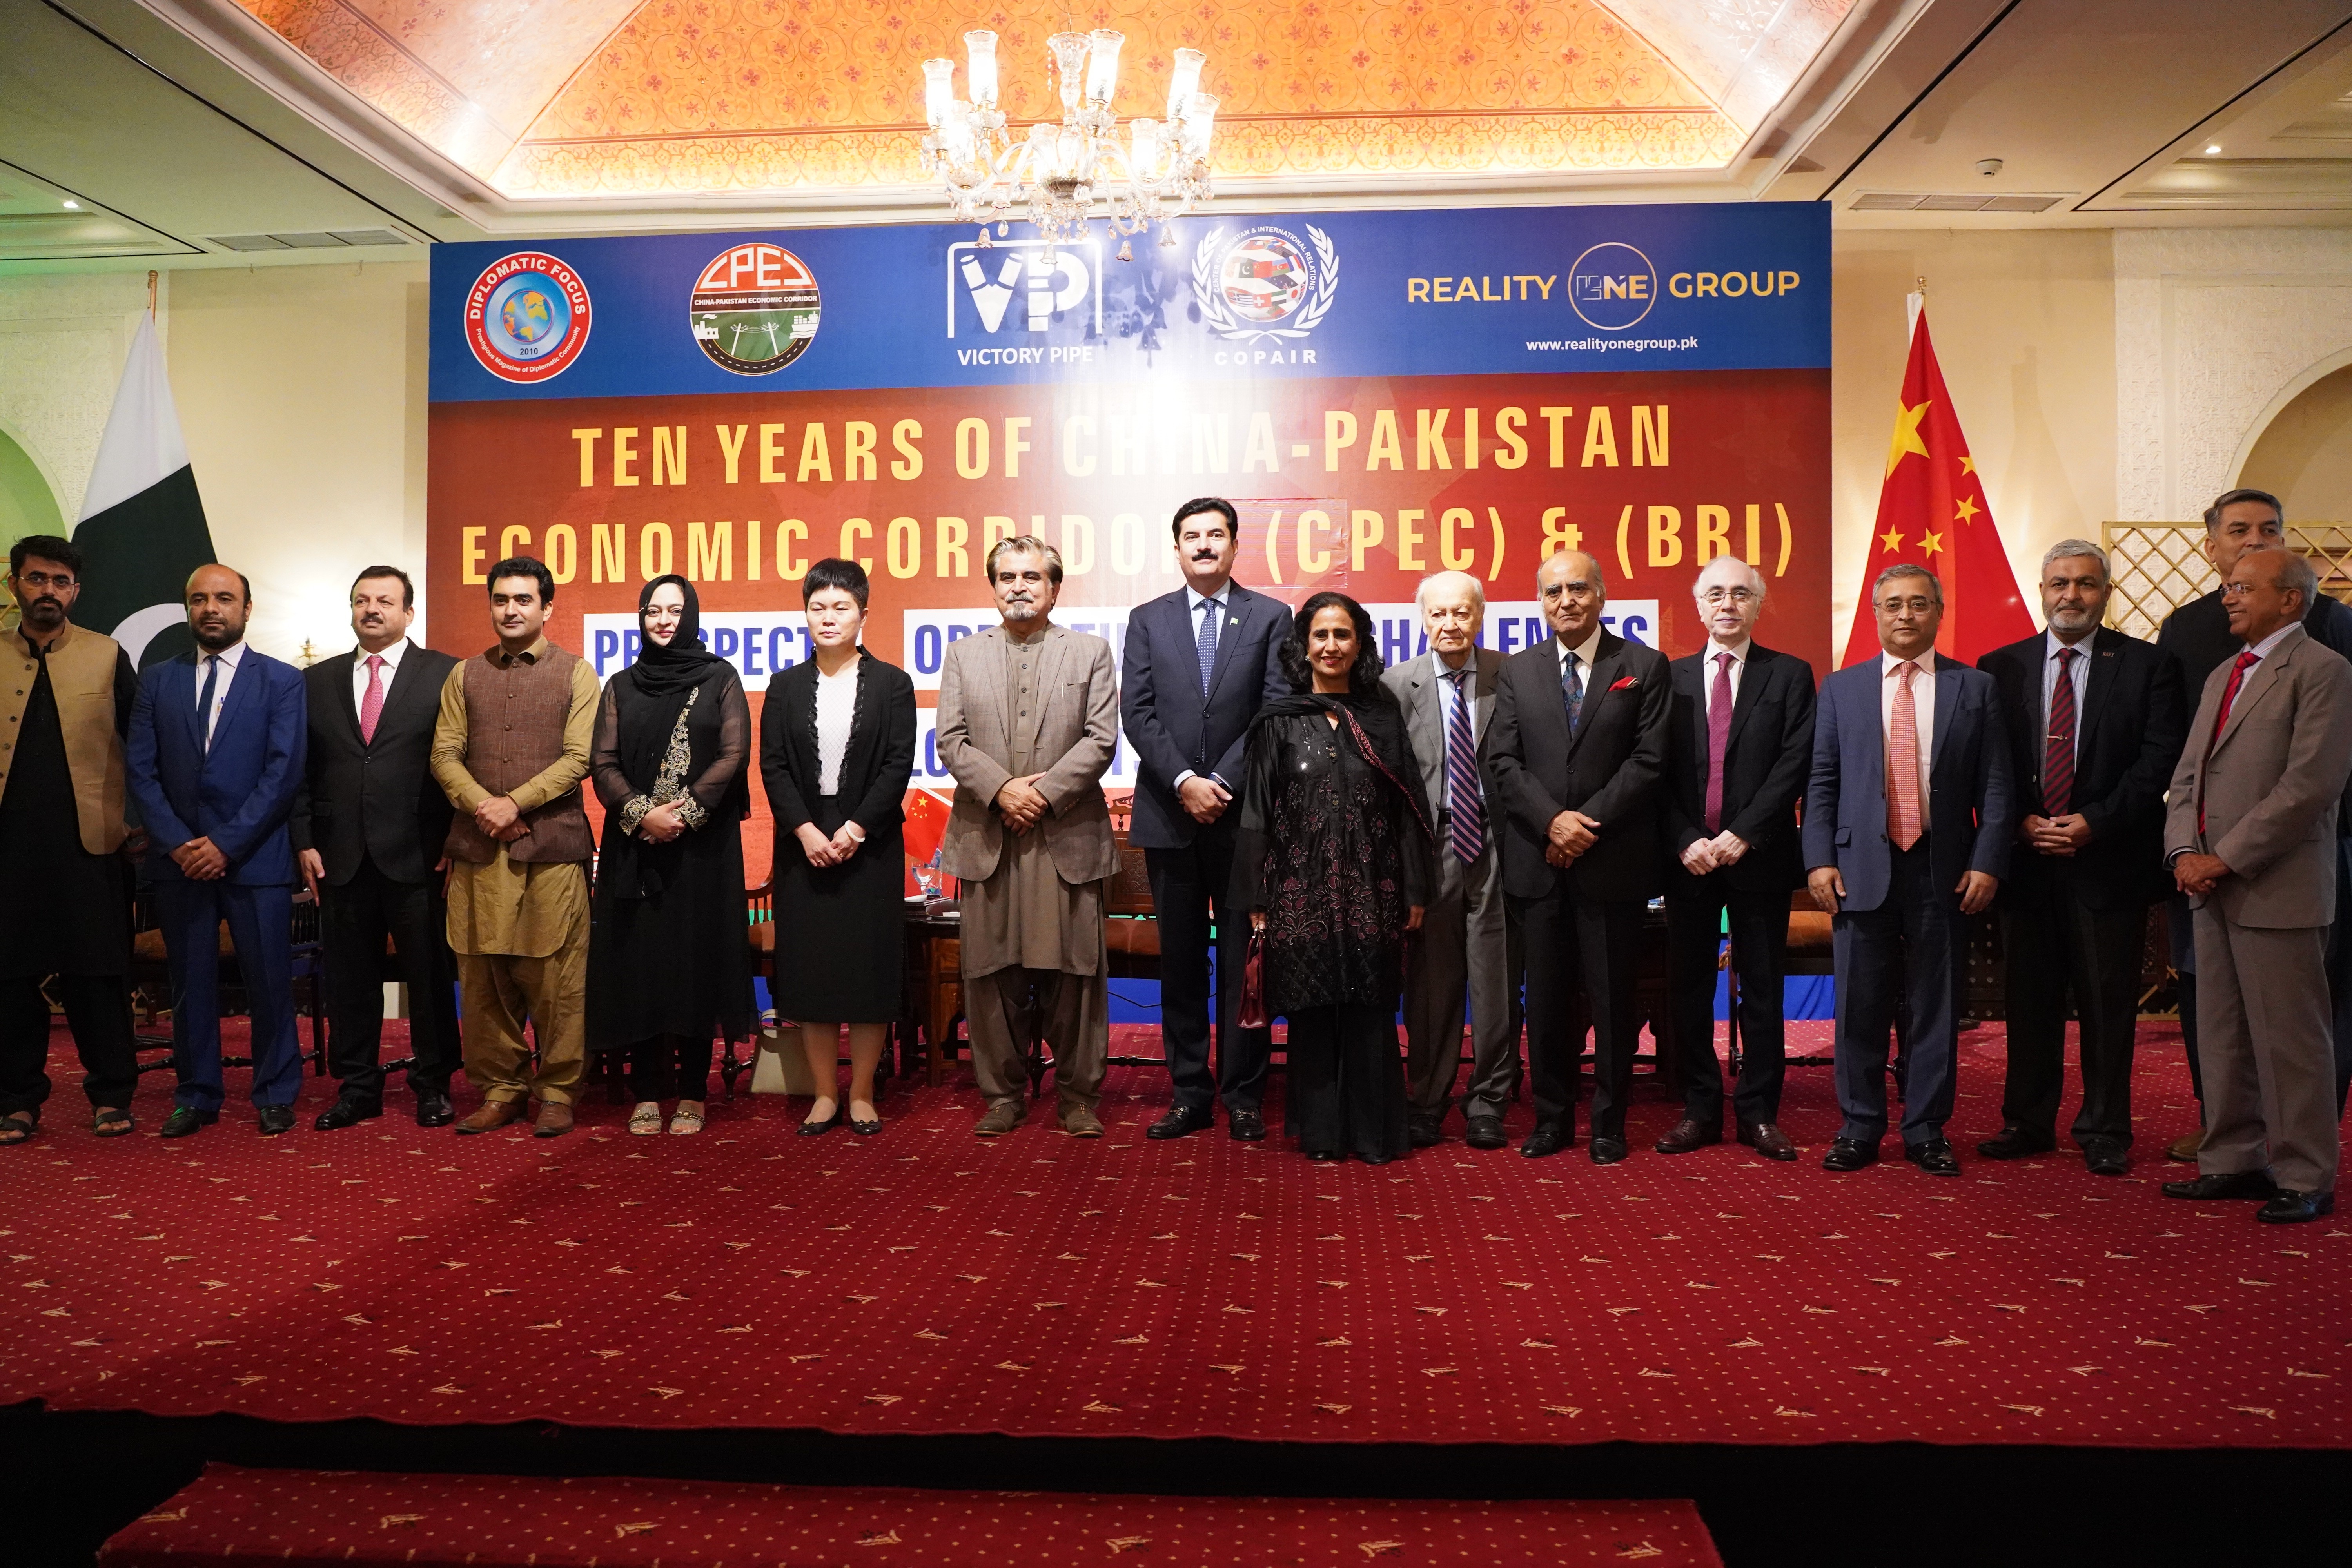 A group photo of all prominent members at an event of CPEC